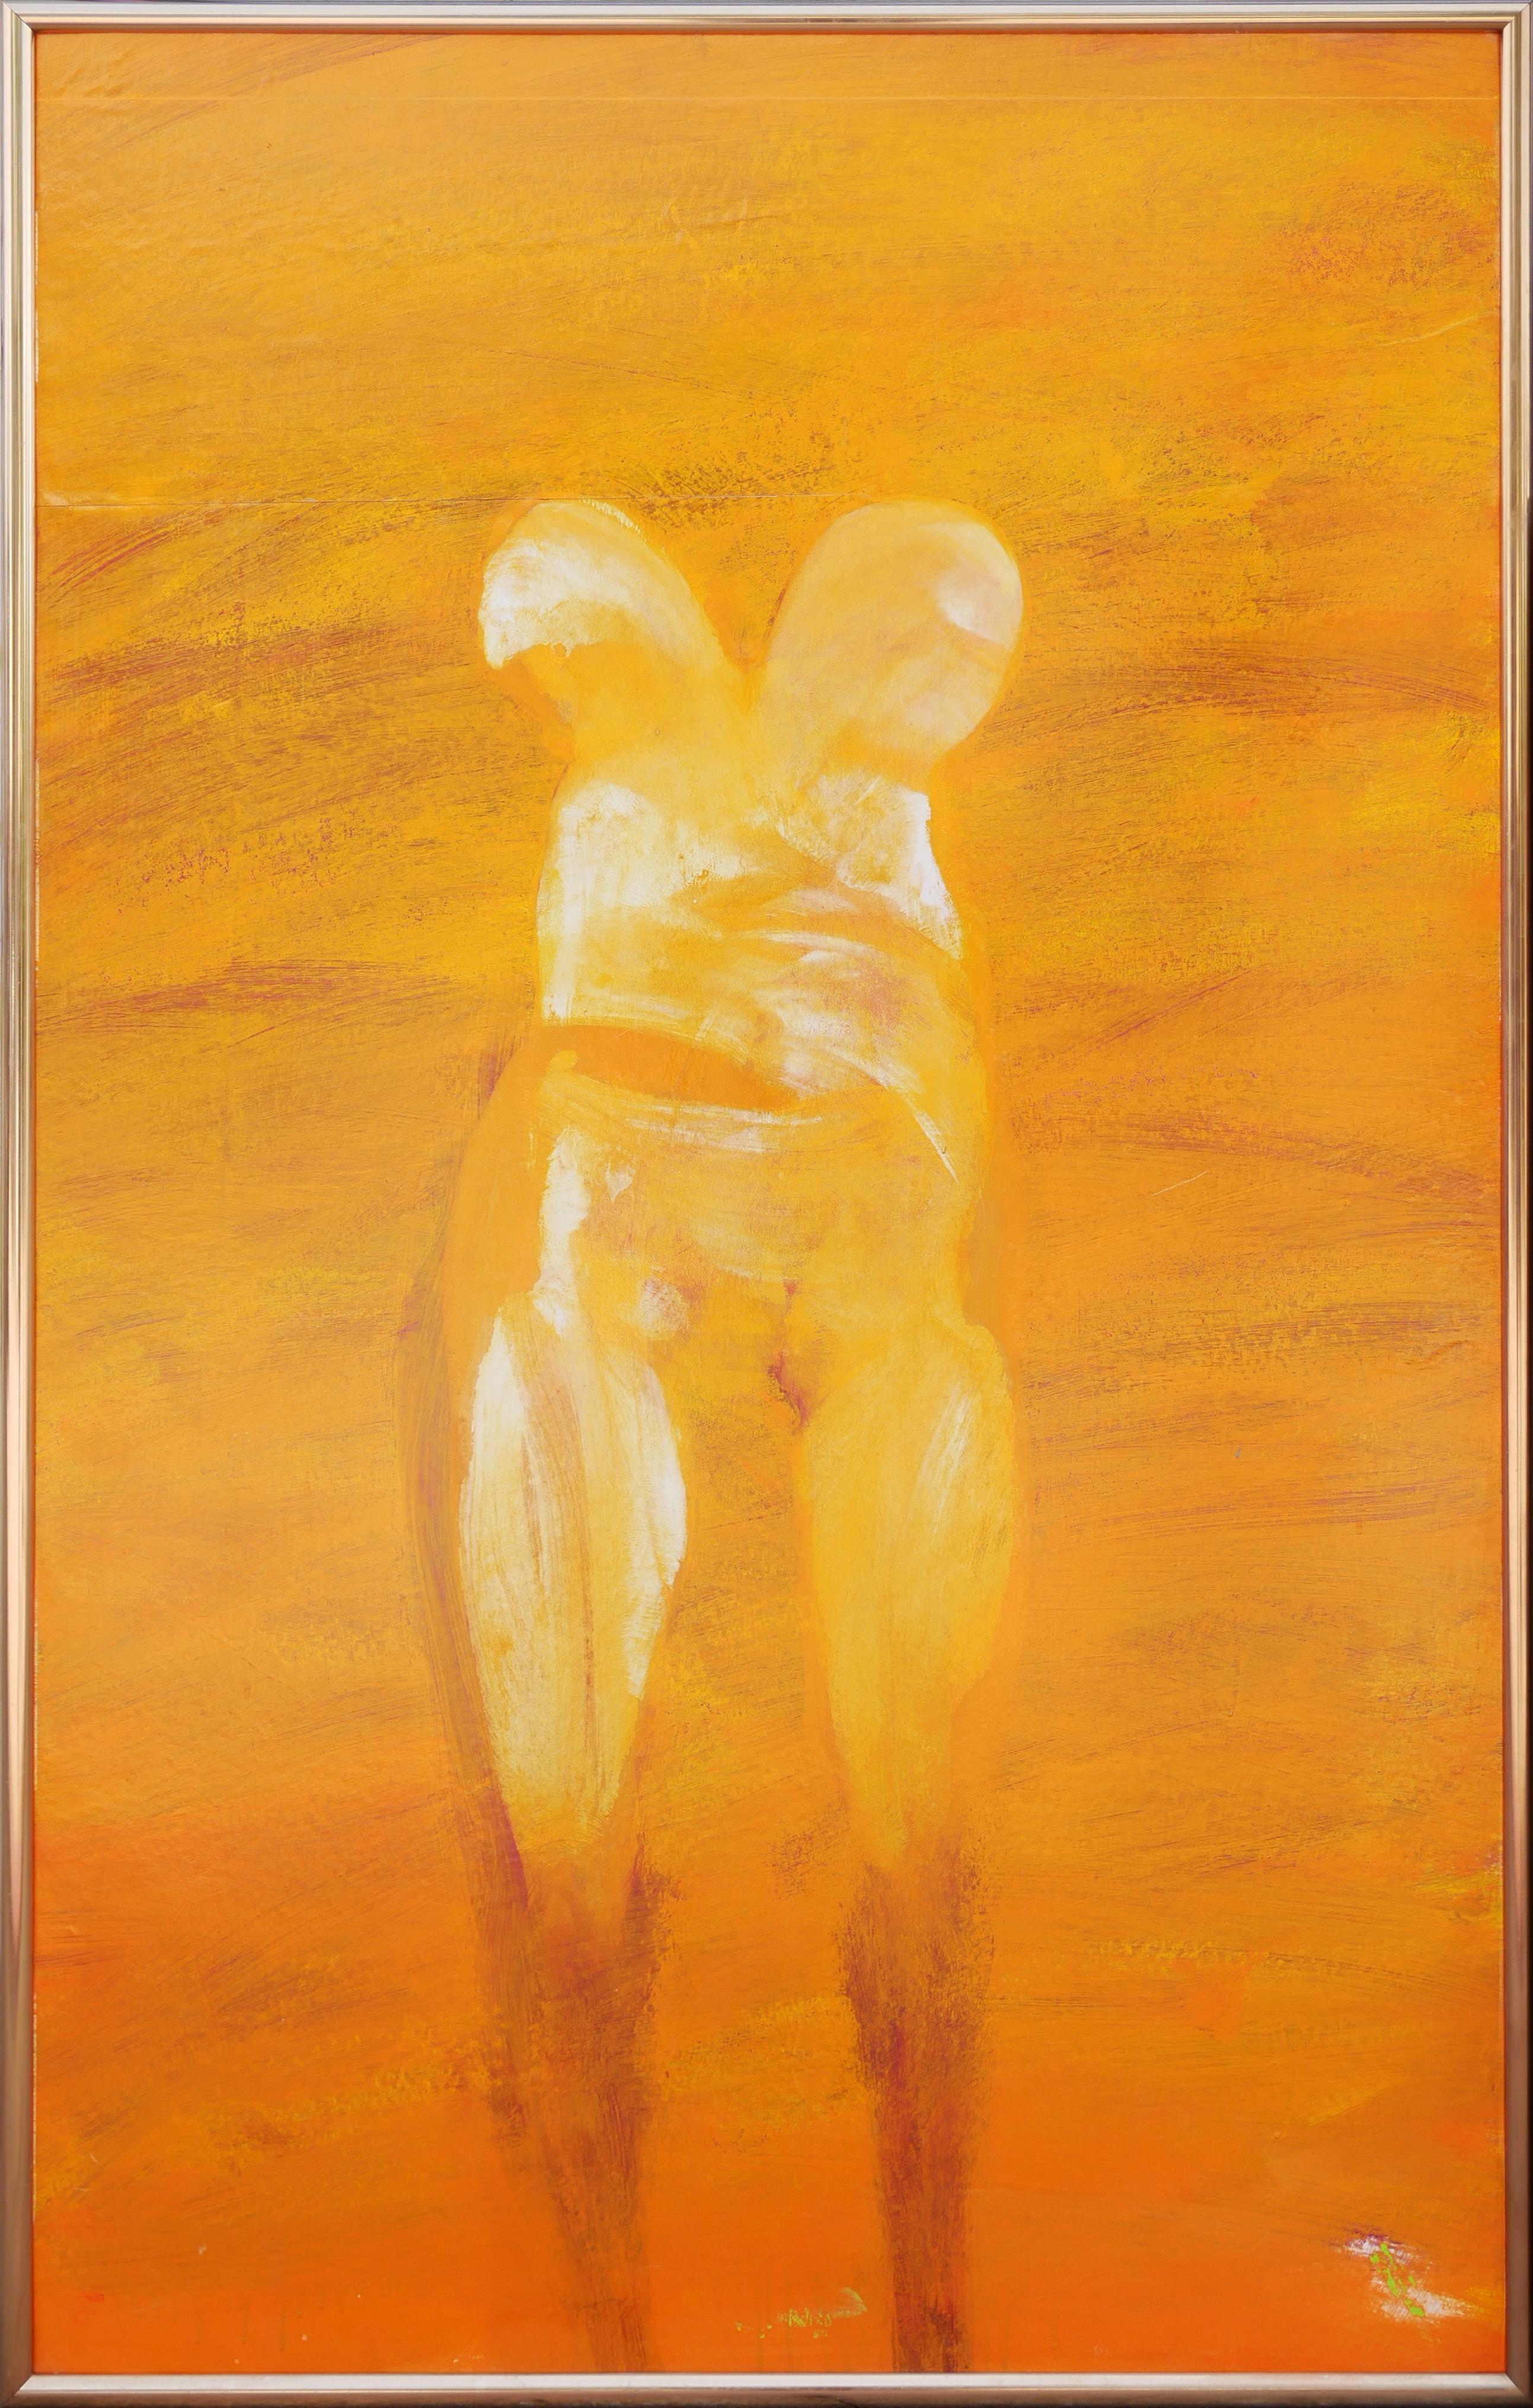 Michael Stack Figurative Painting - Contemporary Orange-Toned Abstract Figurative Female Nude Portrait Painting